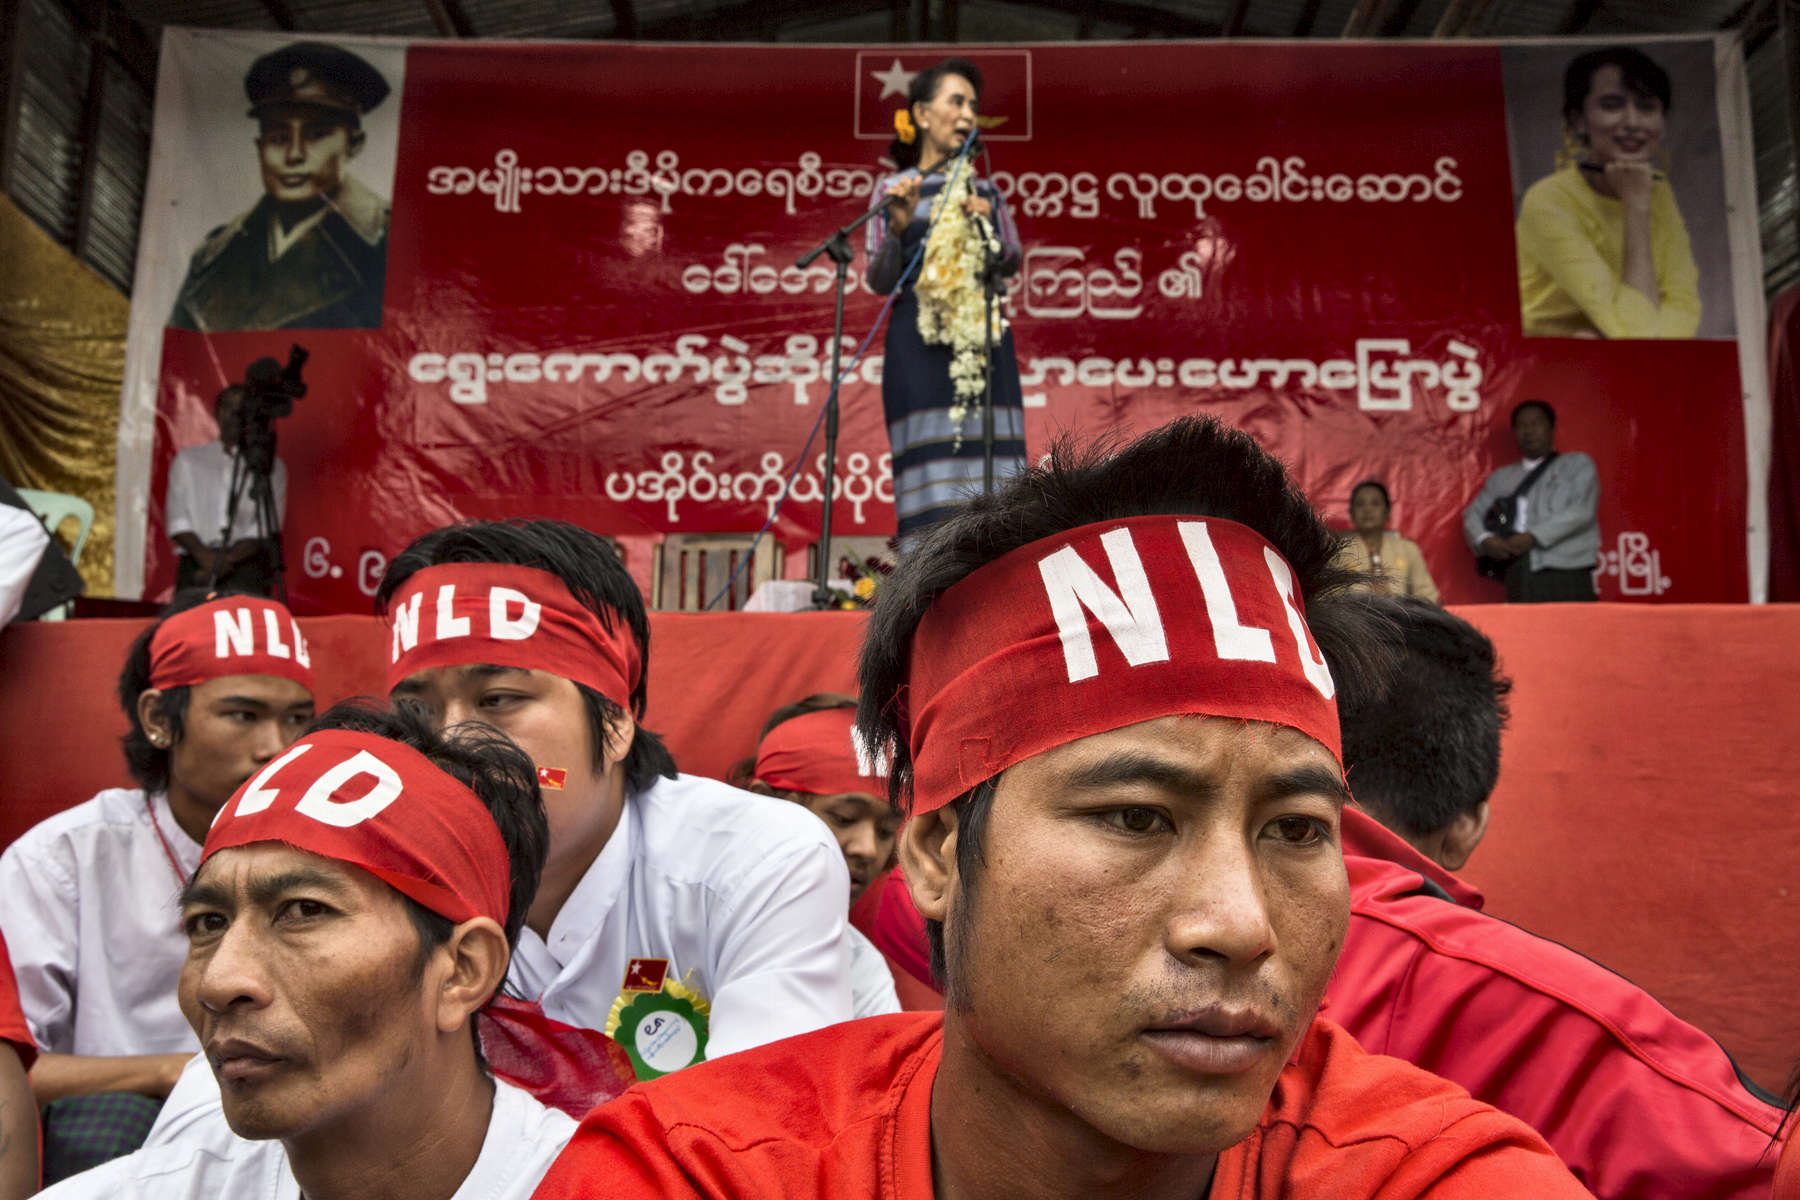 Hopone: NLD supporters sit in front of the stage as Aung San Suu Kyi speaks during an early election campaign visit to Shan state.Paula Bronsteinfor Der Spiegel / Getty Images Reportage